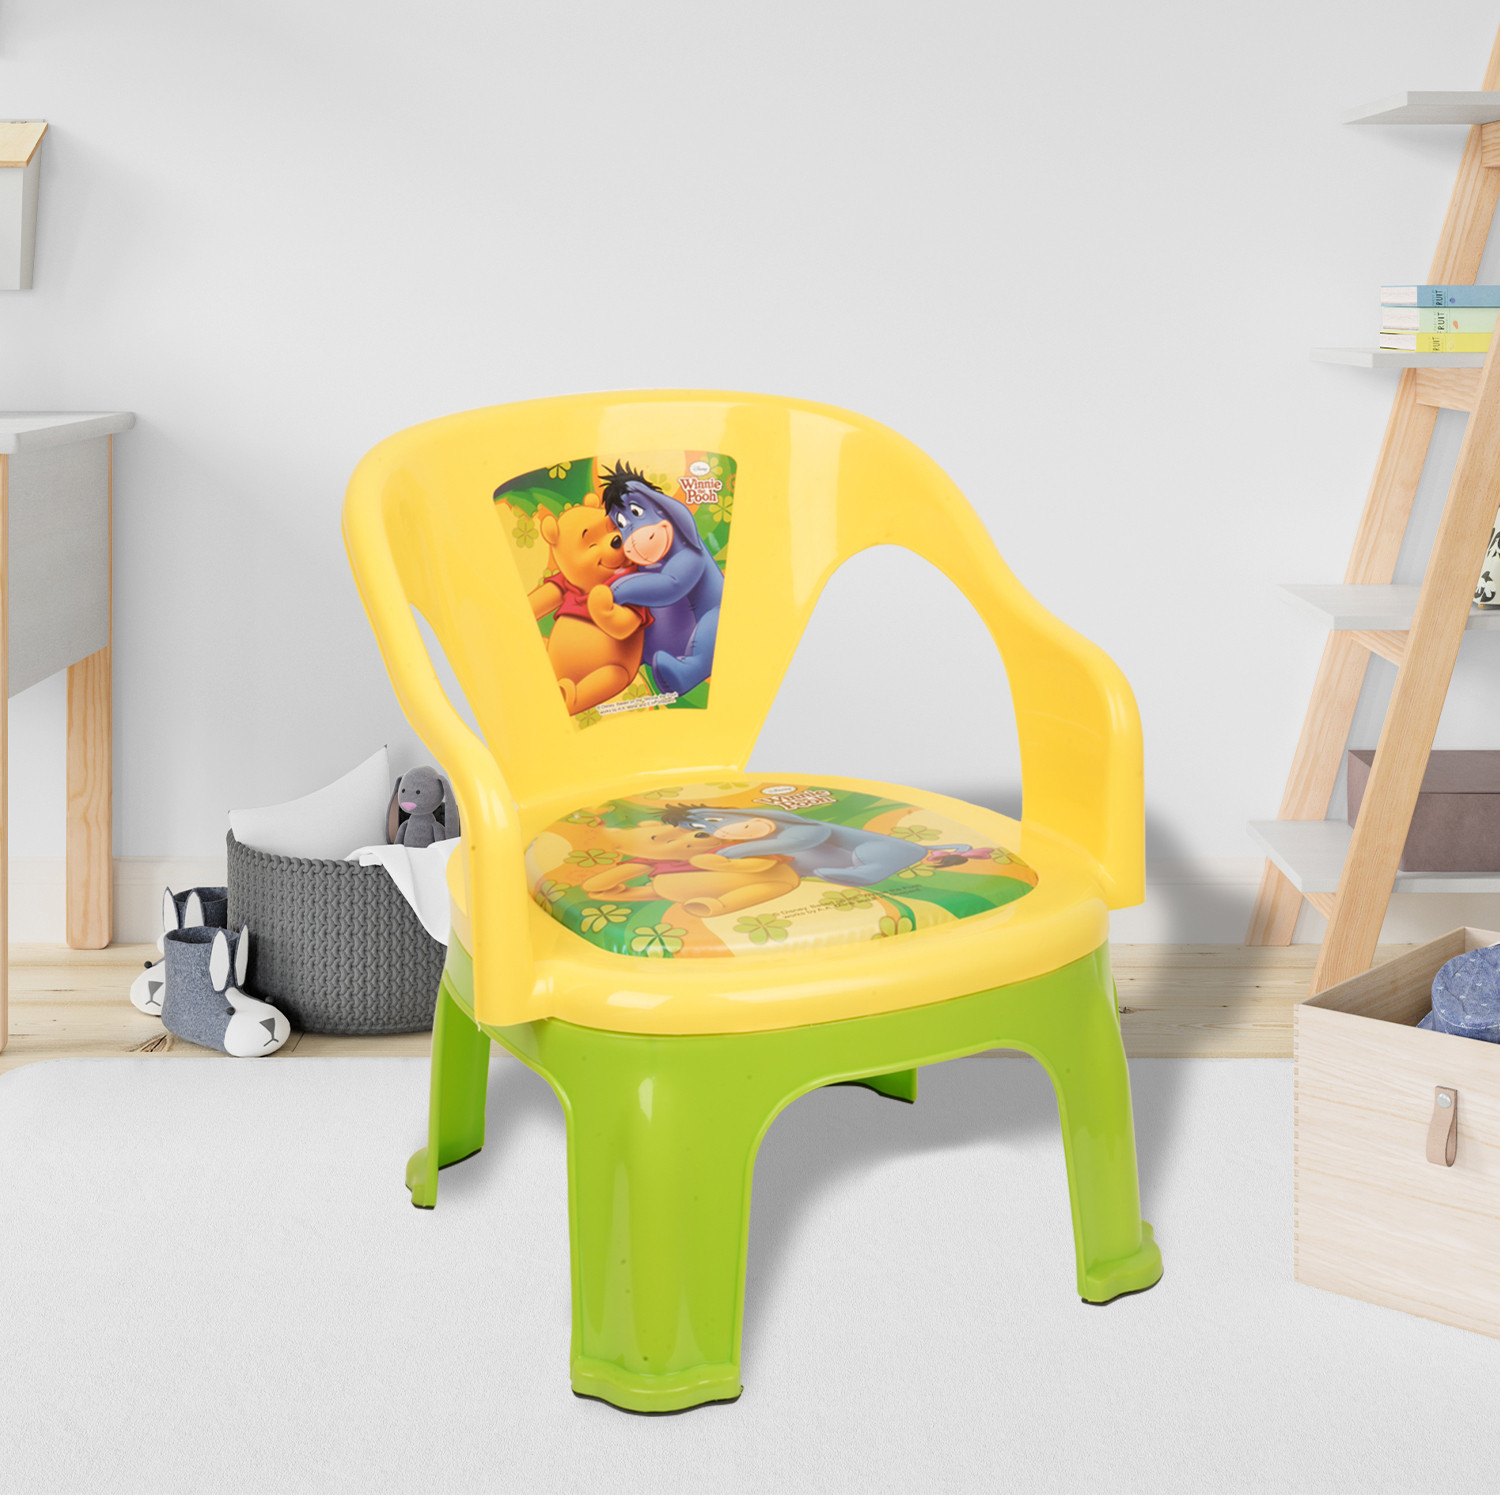 Kuber Industries Disney Pooh Kids Chair | Plastic Foldable Kids Chair | Chair for Kidsroom | School Study Stool | Baby Stool | Indoor or Outdoor Stool for Kids | Capacity 30 Kg | Yellow & Green